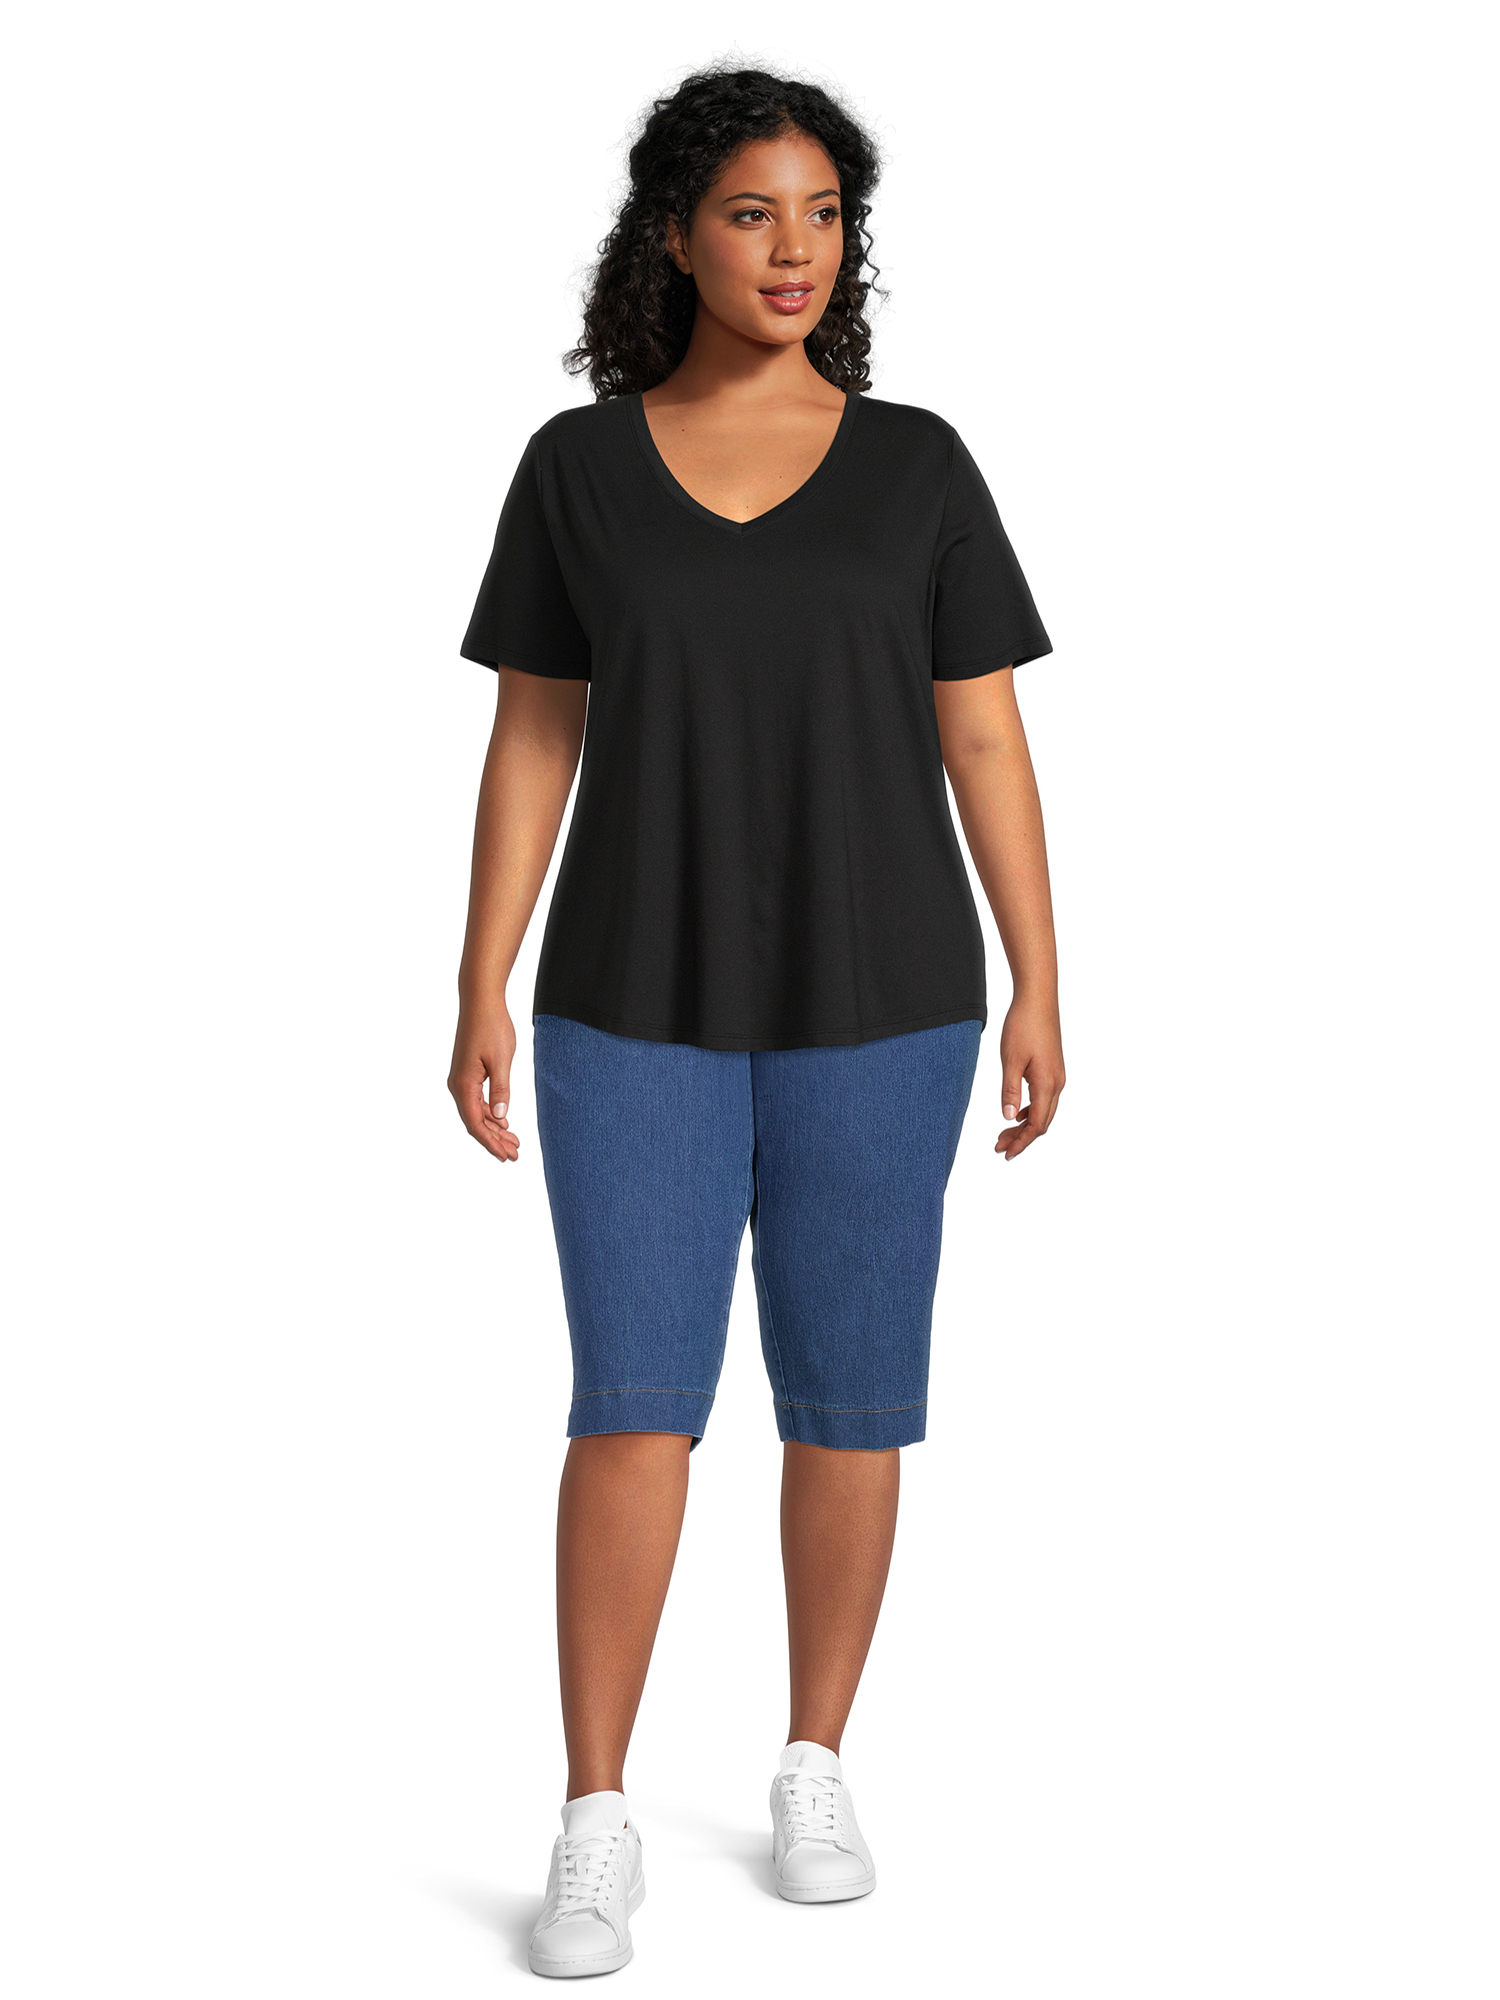 Just My Size Women's Plus Size Pull On 2 Pocket Stretch Capri - image 5 of 6